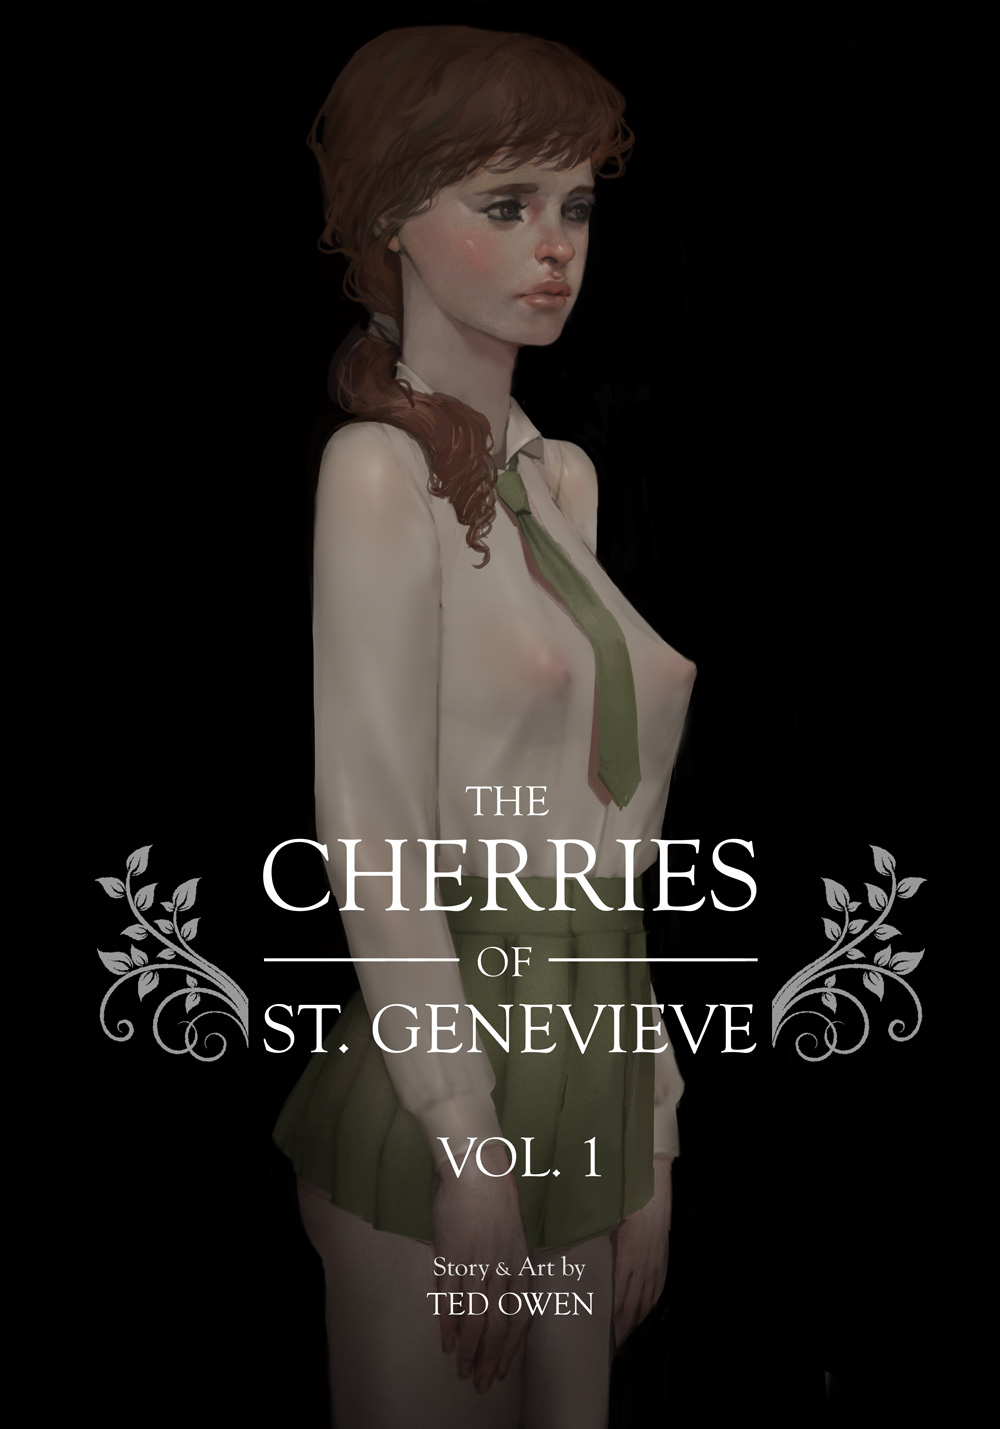 [ted owen] The Cherries of St. Genevieve 